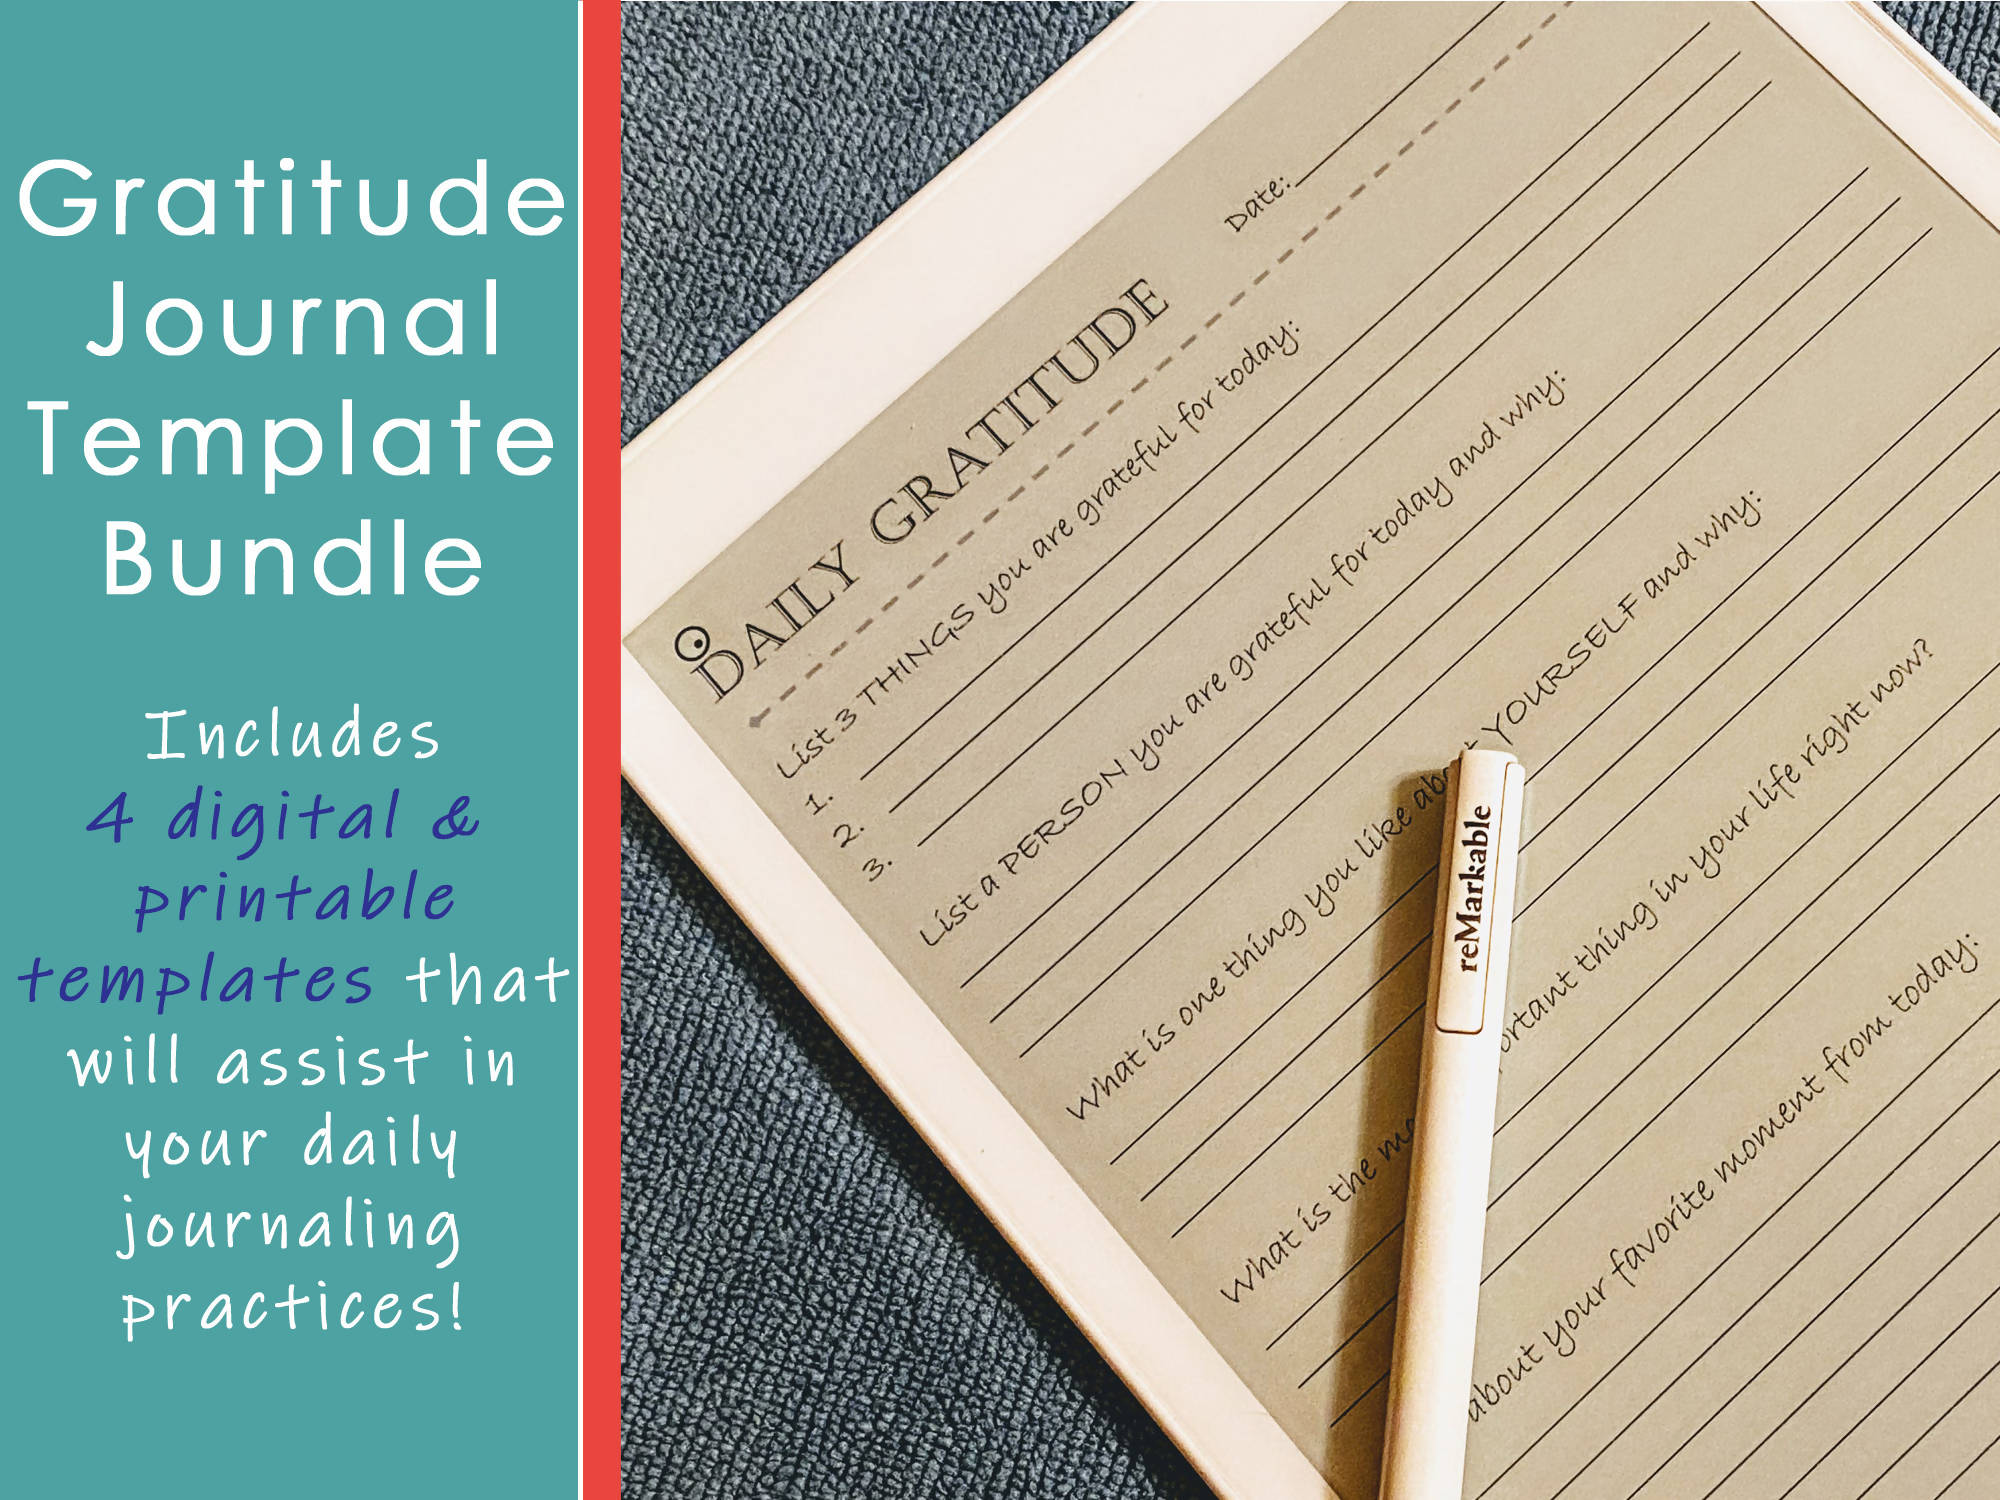 Just created a 5 minute journal template! : r/RemarkableTablet